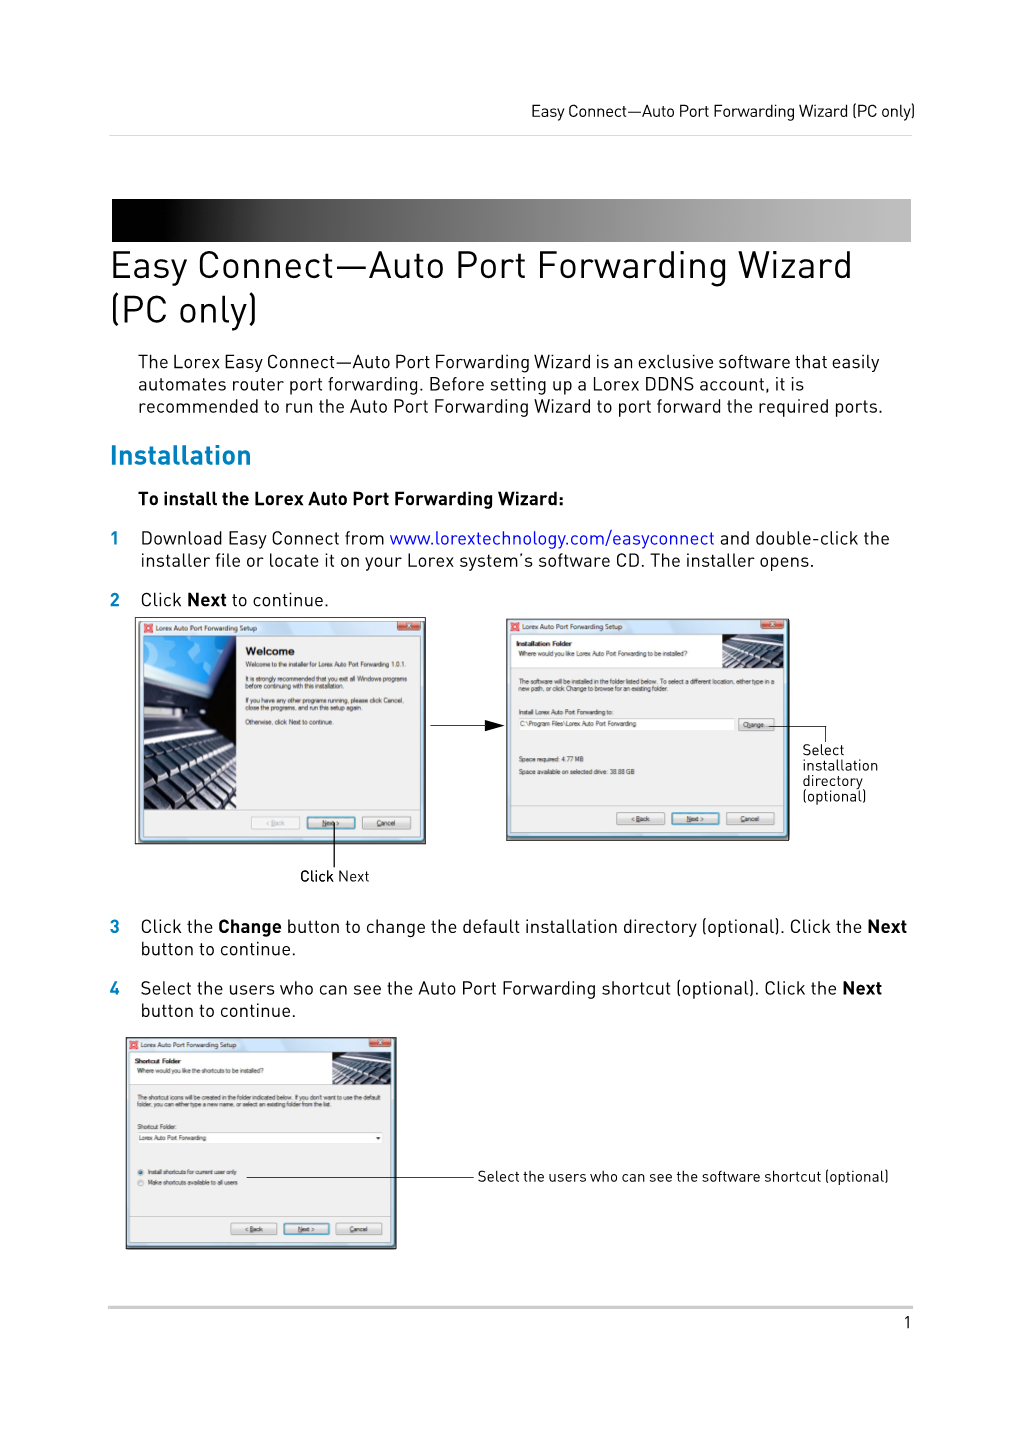 Easy Connect—Auto Port Forwarding Wizard (PC Only)